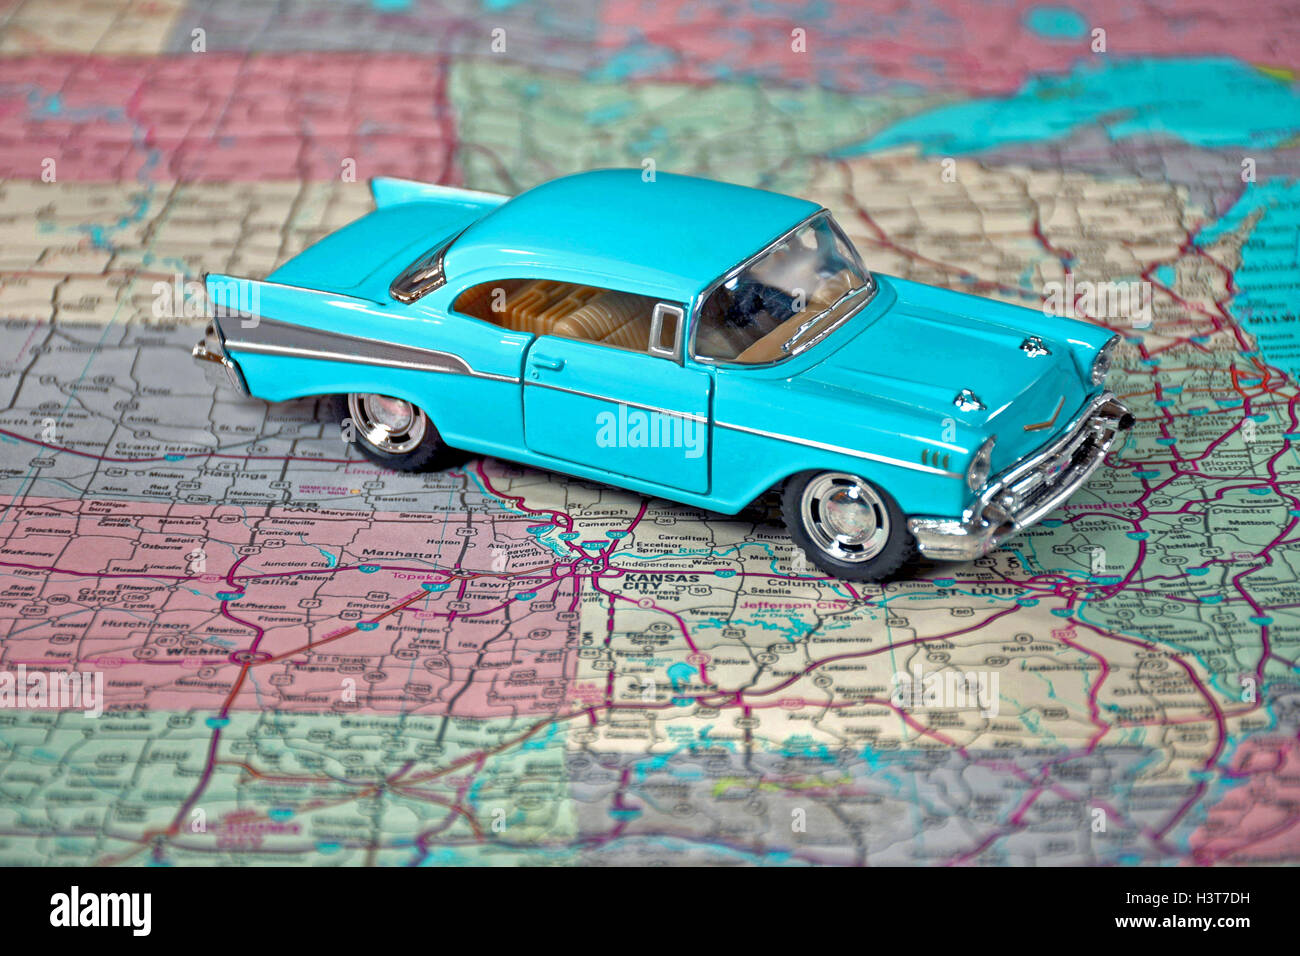 close up of turquoise retro car on road map Stock Photo